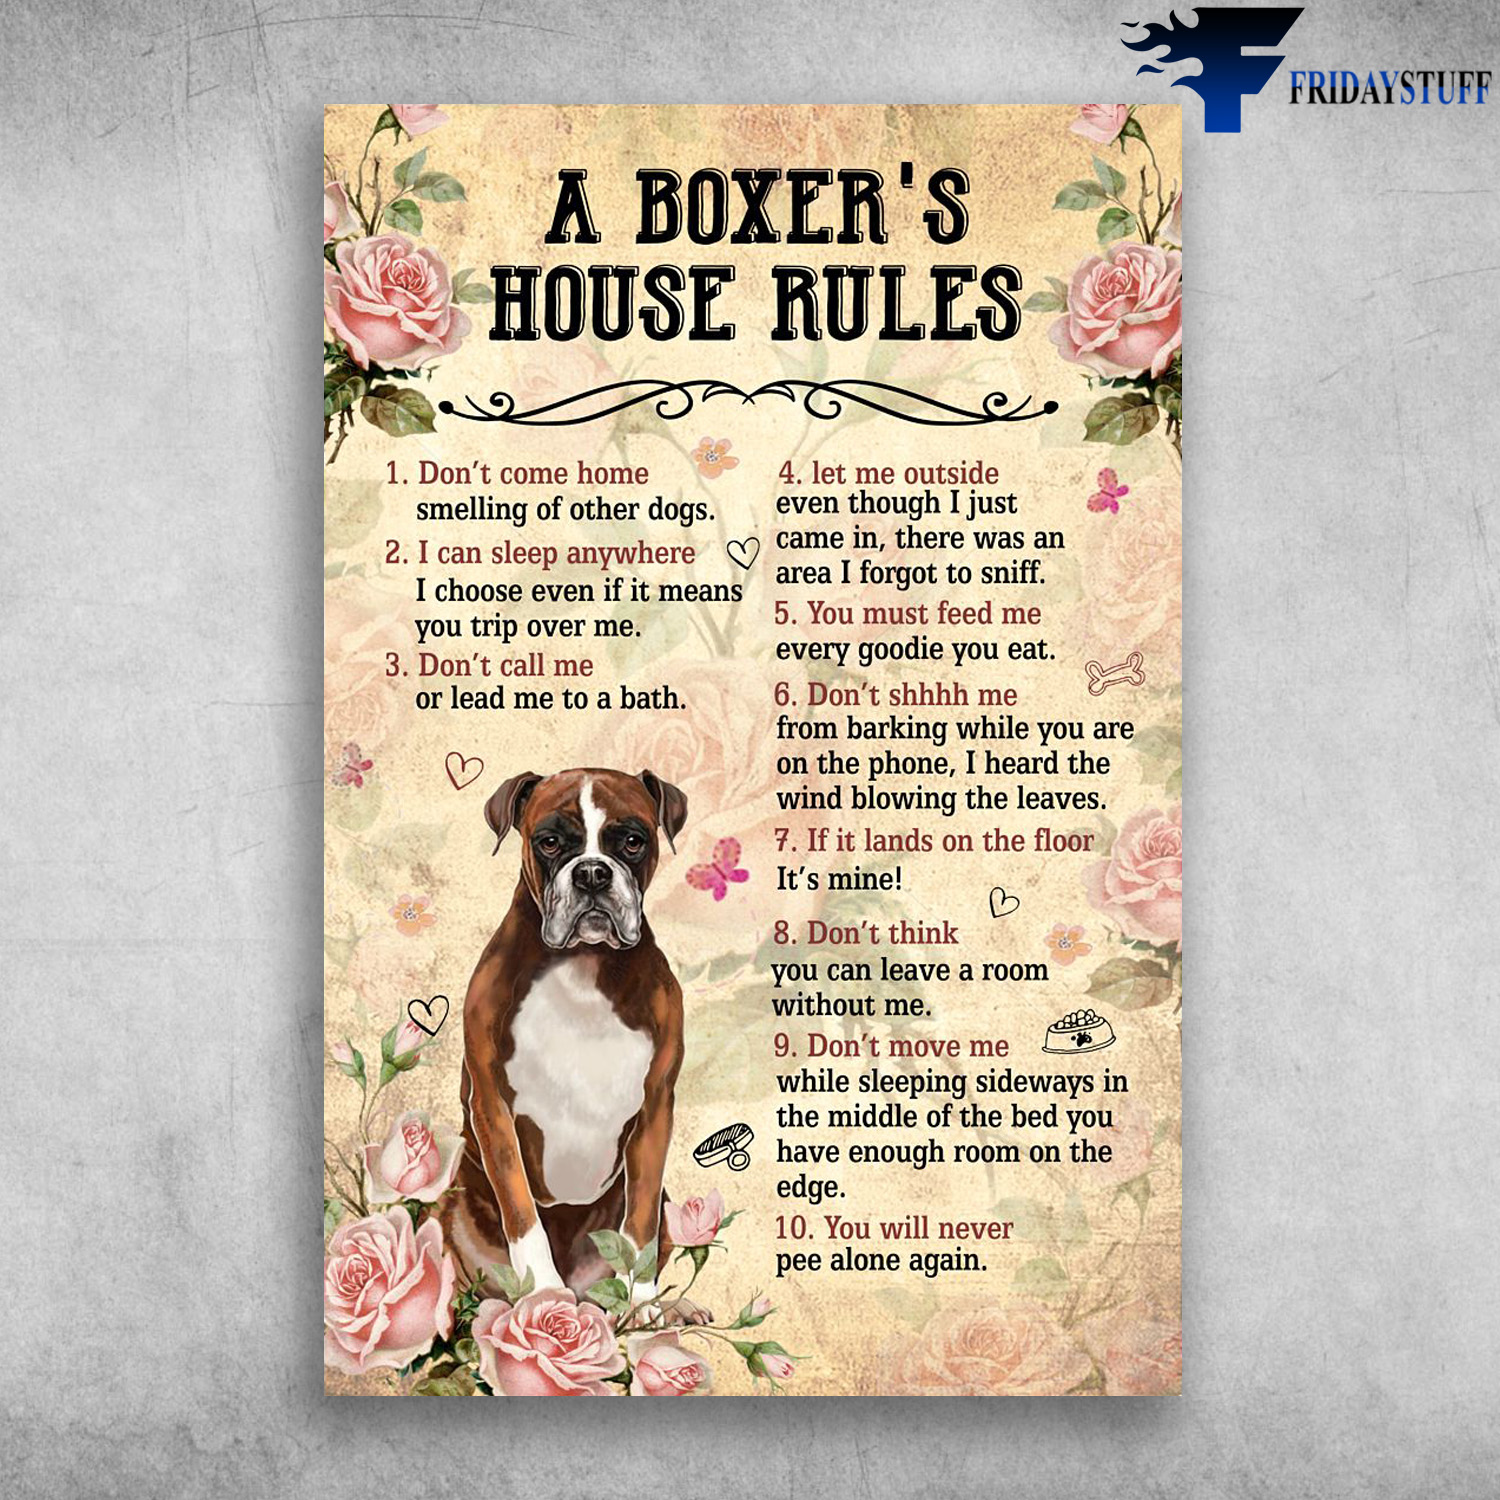 A Boxer's House Rules - Don't Come Home, I Can Sleep Anywhere, Don't Call Me, Let Me Outside, You Must Feed Me, Don't Shhhh Me, If It Lands On The Floor, Don't Think, Don't Move Me, You Will Never Pee Alone Again